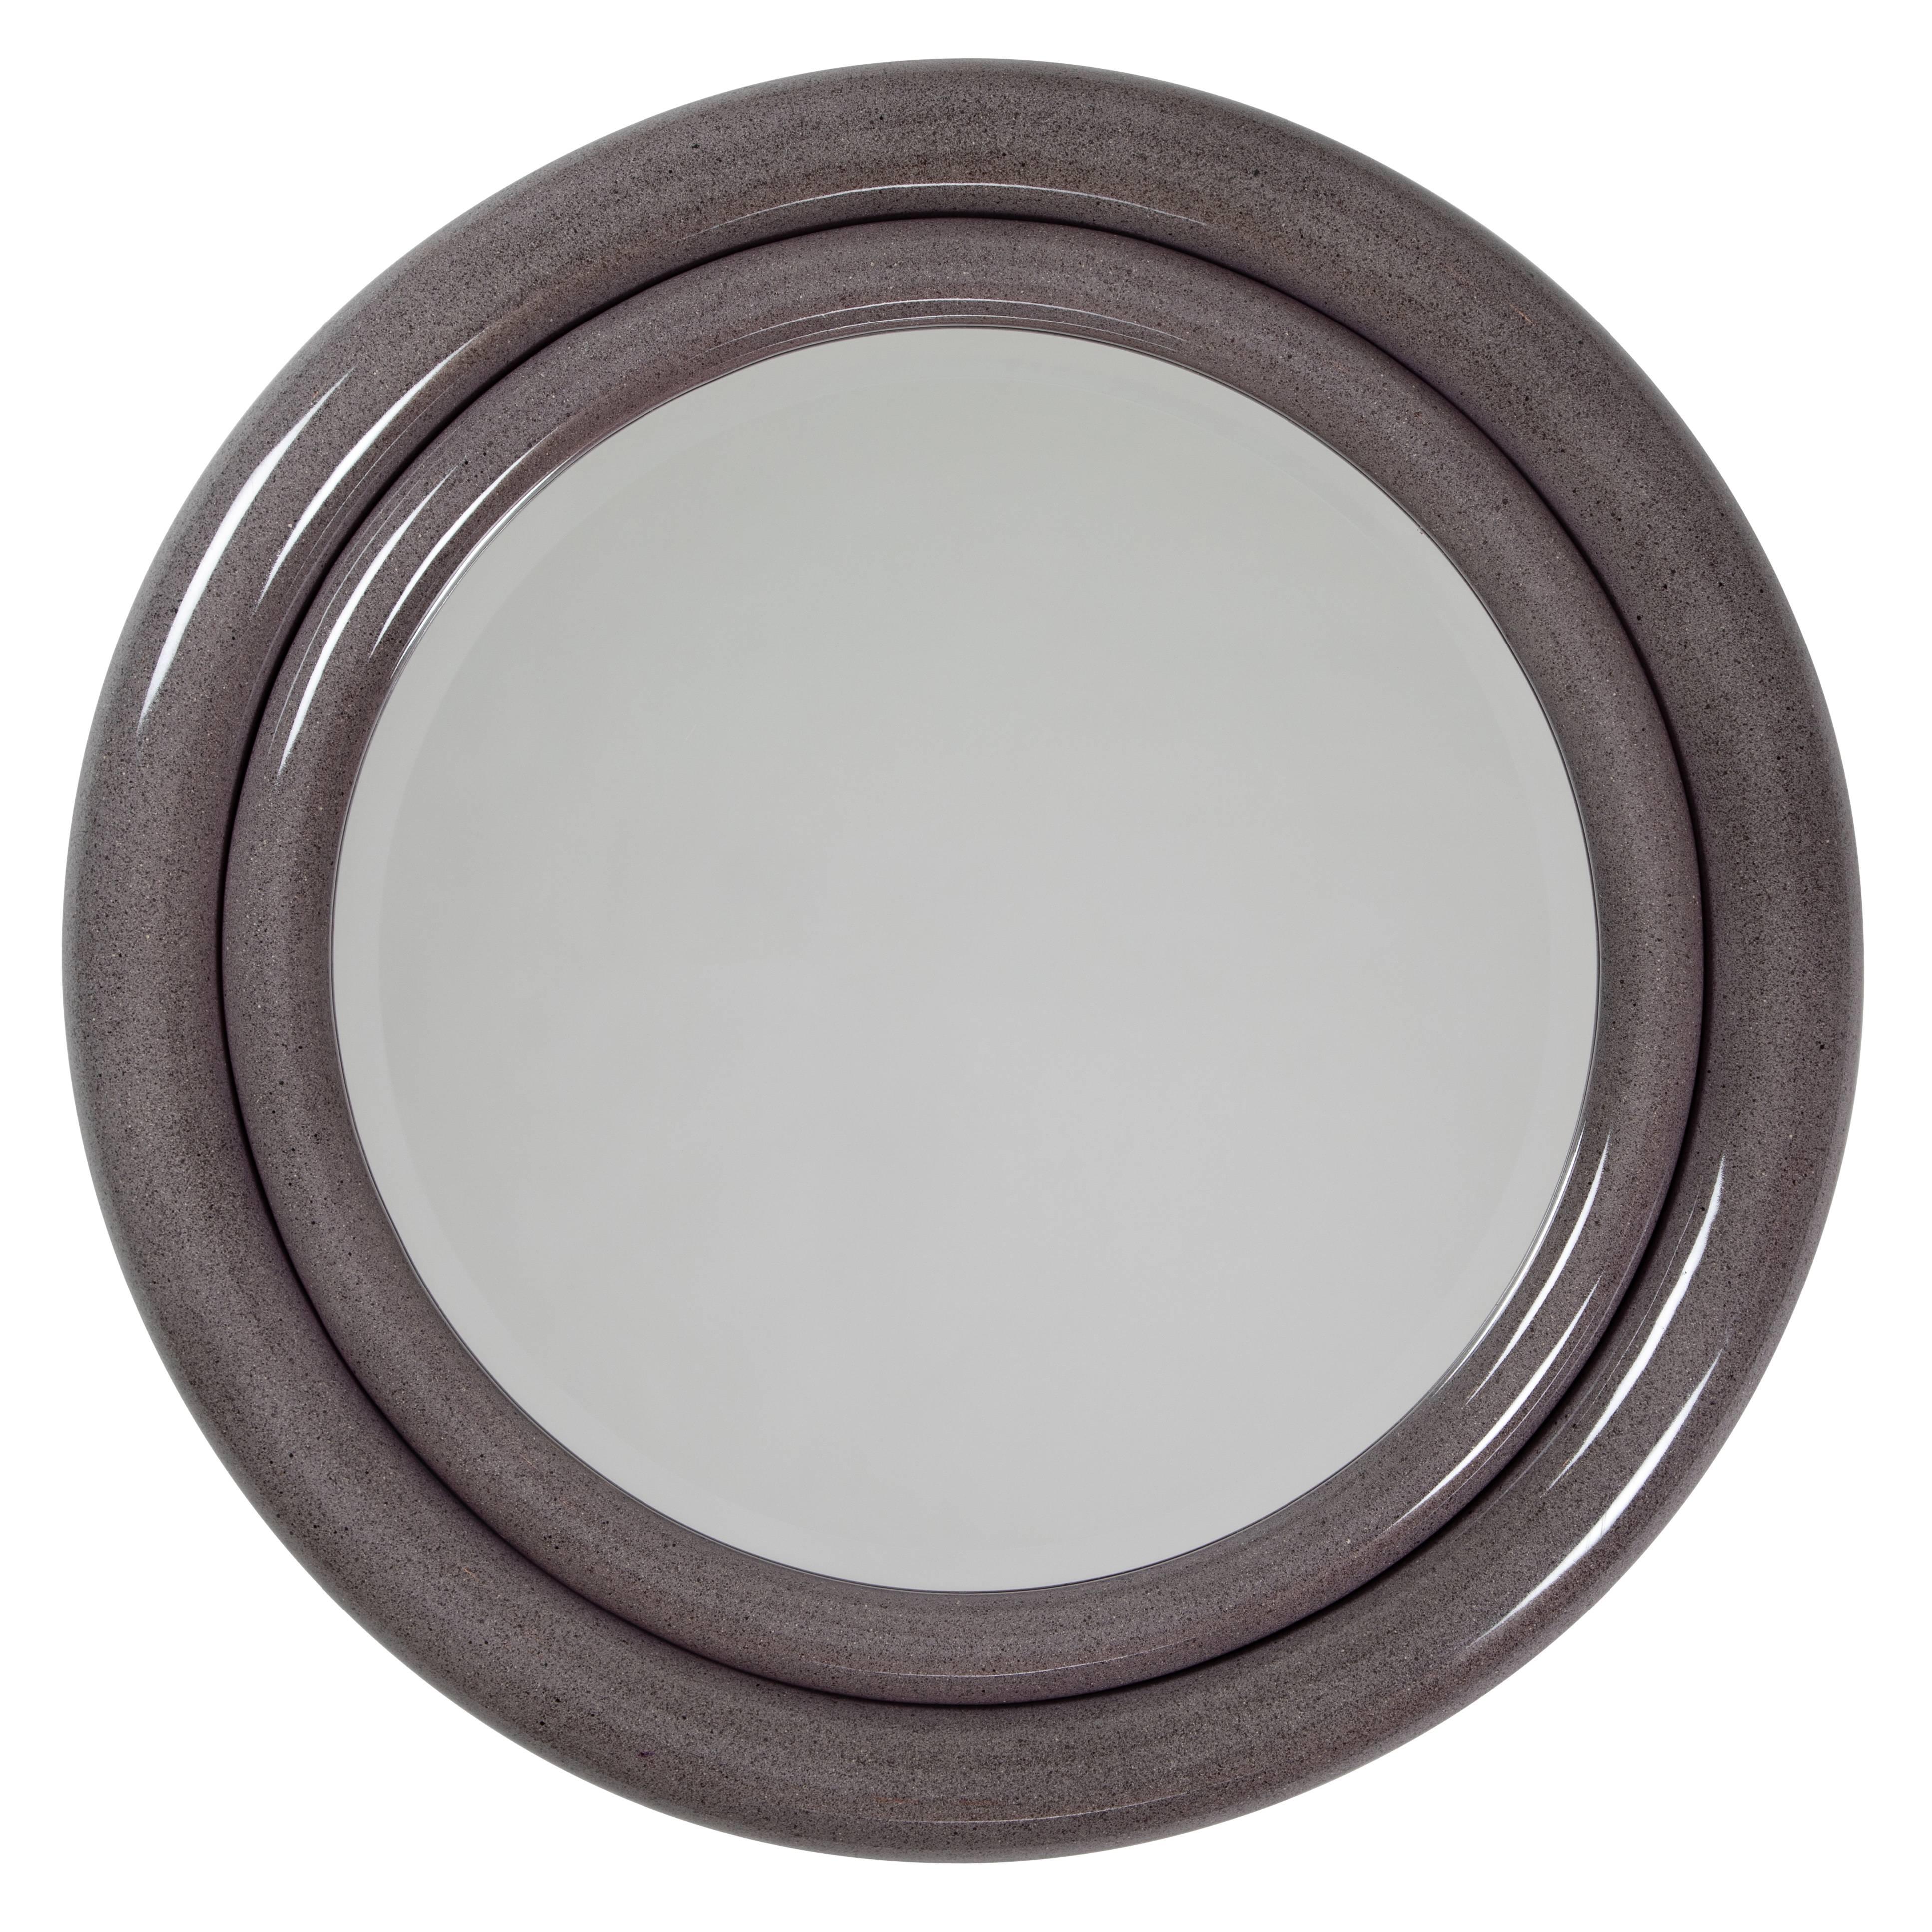 Karl Springer "Double Bullseye" Mirror in Faux Stone Lacquer, circa 1980s For Sale